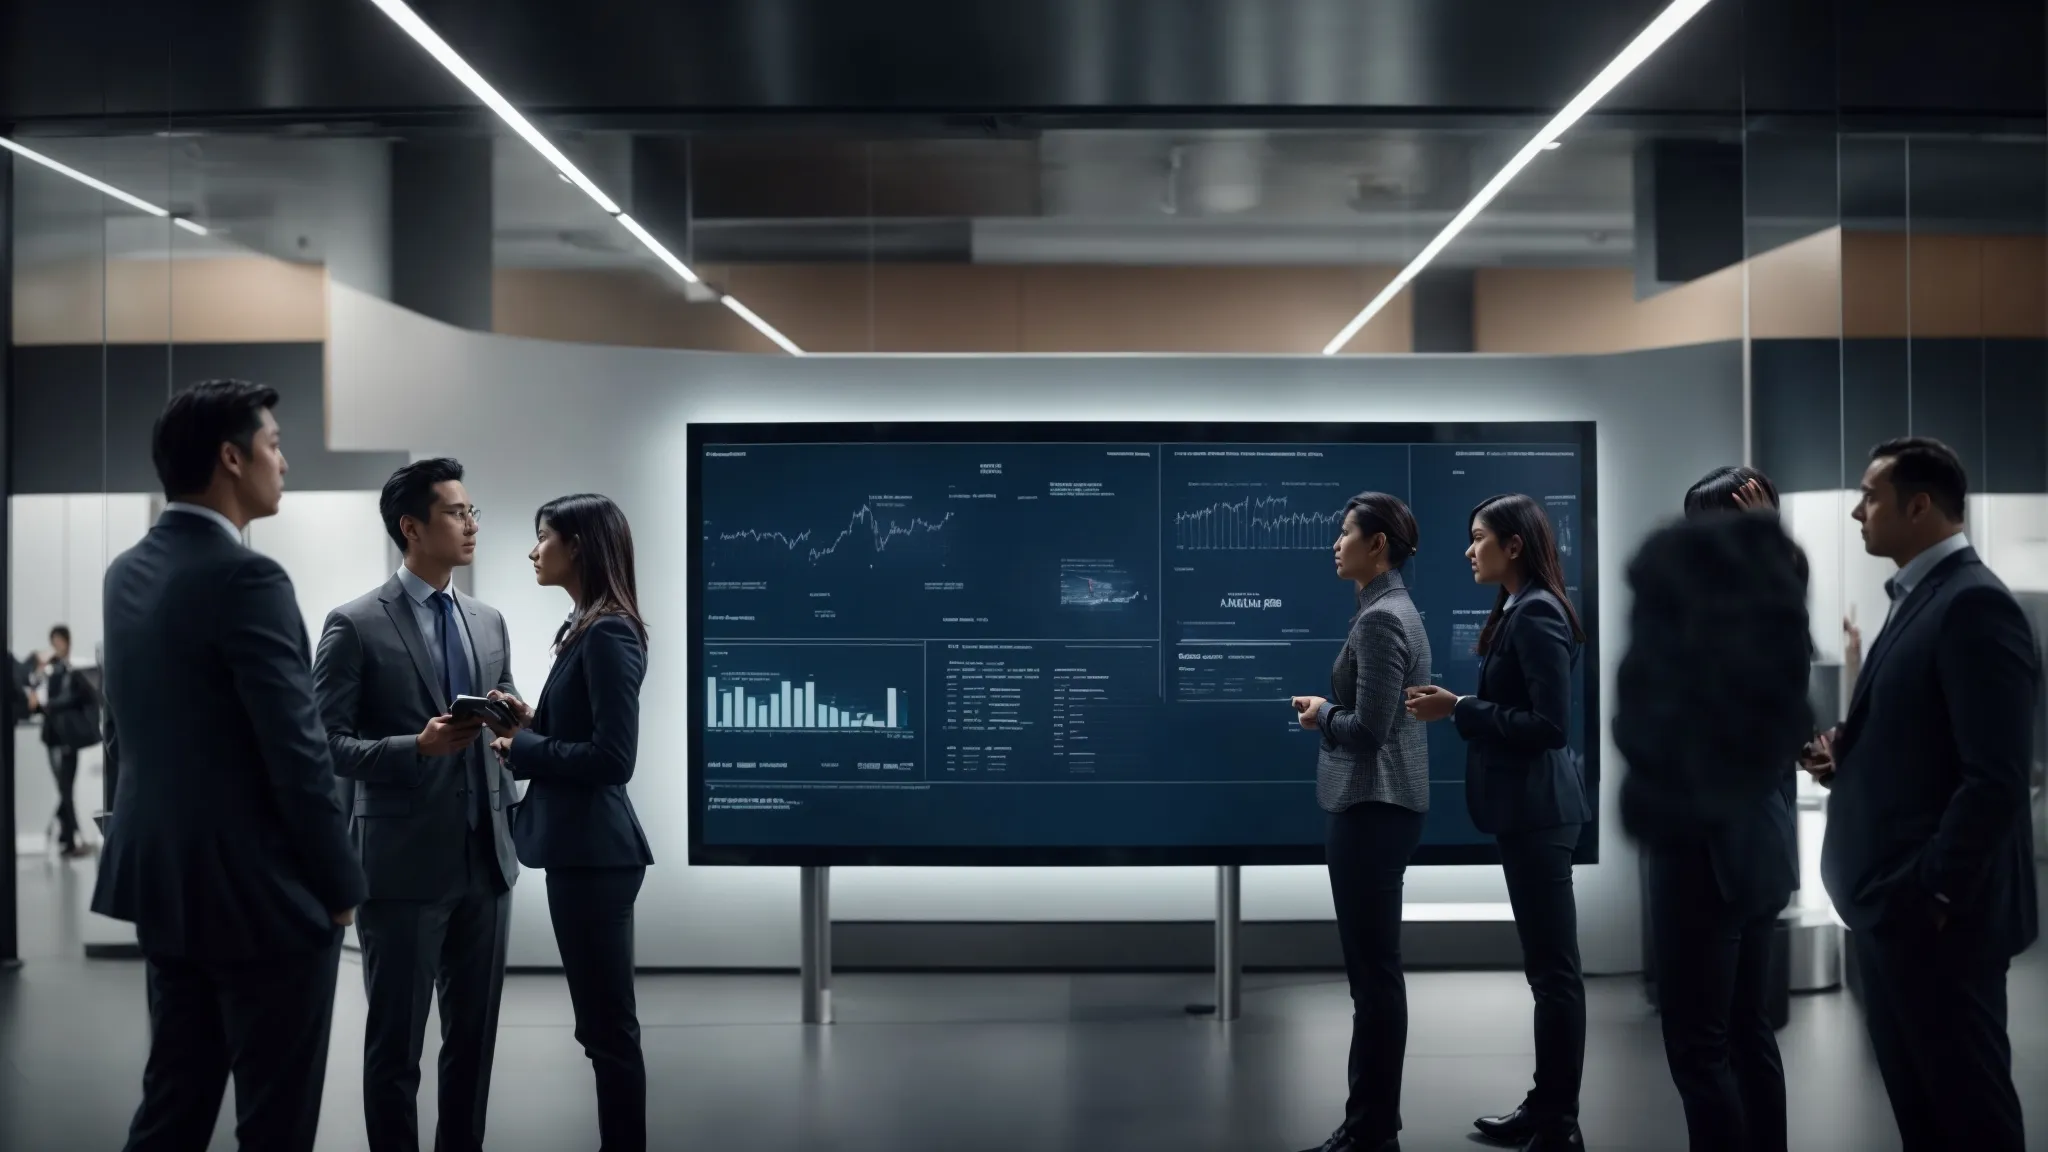 a team of marketing professionals discusses strategies around a digital display showcasing ai-driven analytics.